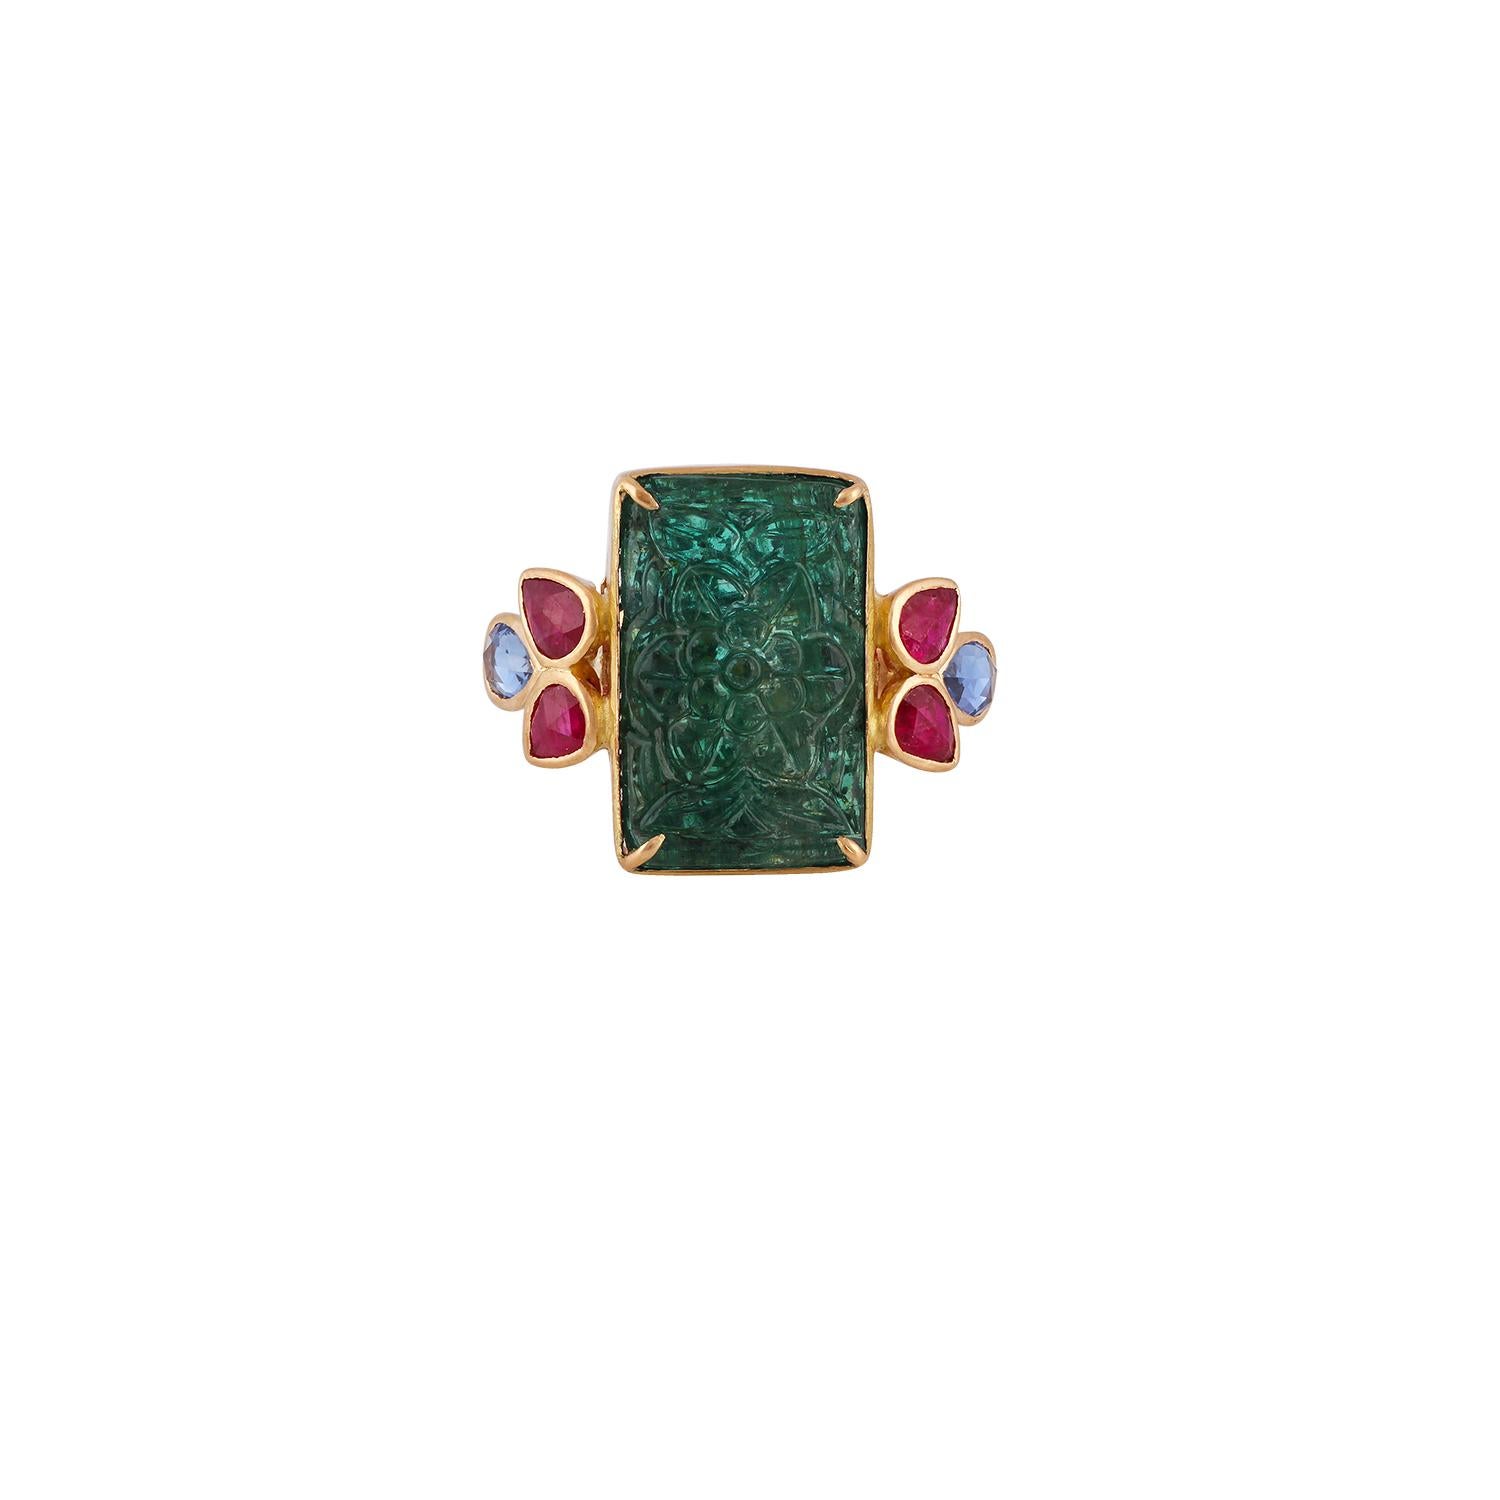 This is an elegant Carved Zambian Emerald, Sapphire & Ruby Ring with 1 piece of Carved Zambian emerald weight 9.41 carat which is surrounded by Sapphire  weight 0.71 carat & Ruby  weight 0.92 carat  this entire ring studded in 18k Yellow gold 

Ring